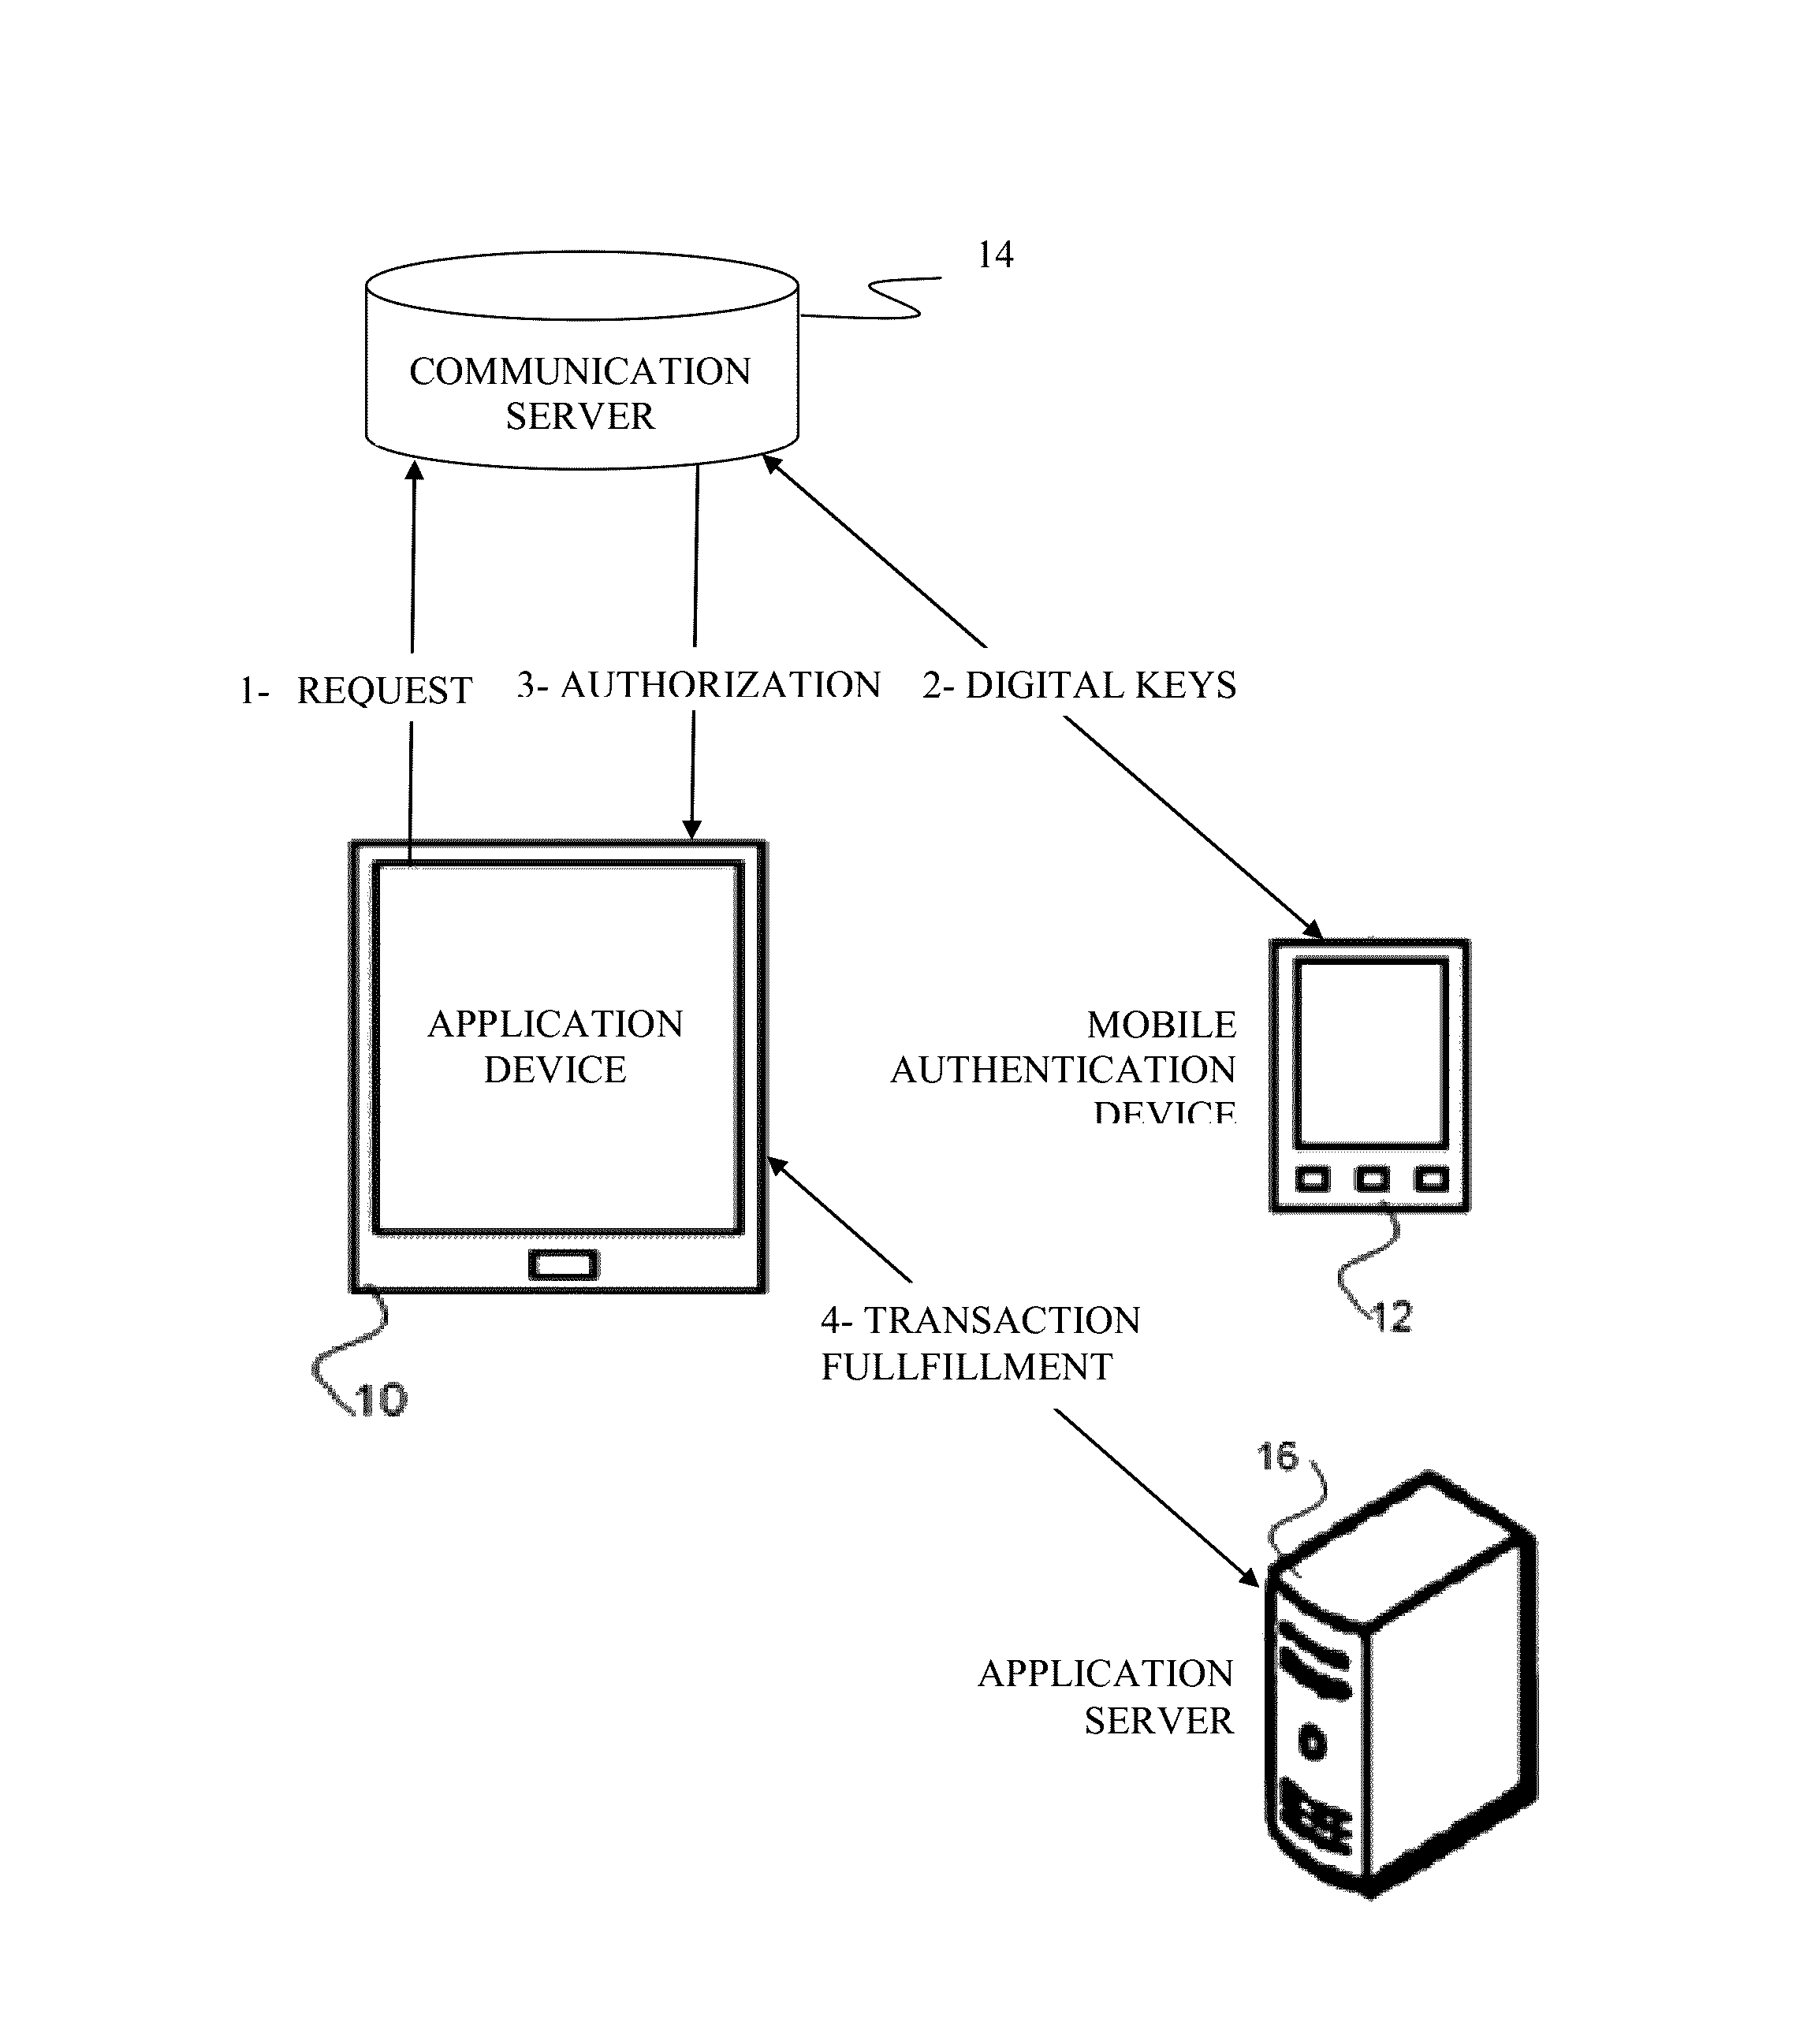 Method for adaptive authentication using a mobile device